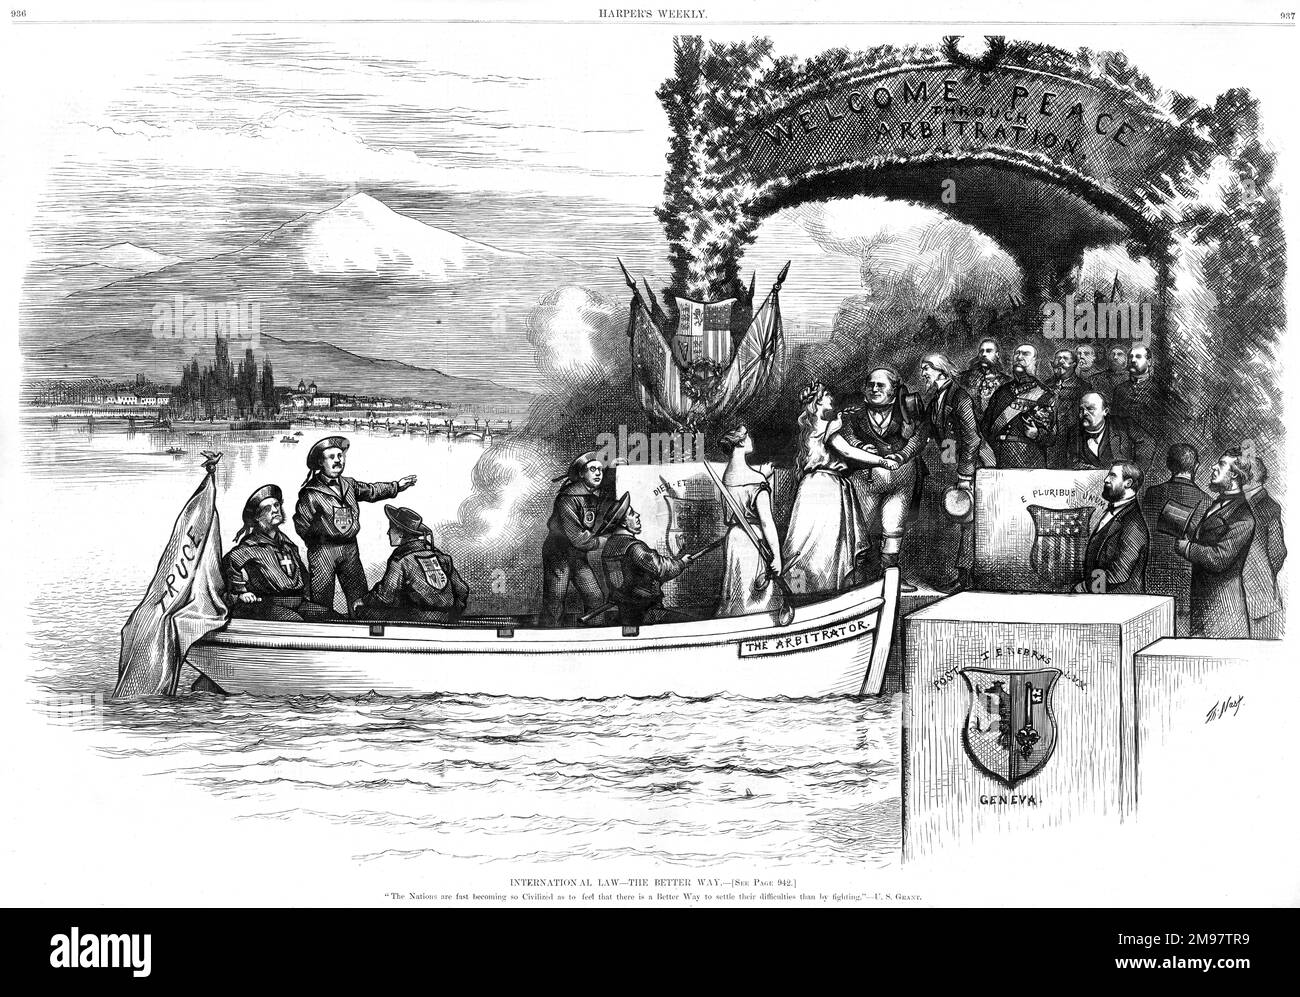 International Law - The Better Way by Thomas Nast in Harper's Weekly, 14th November 1874. A boat called The Arbitrator carrying the flag of truce lands in Geneva. Two female allegorical figures, Peace (dove and olive branch) and Justice (sword and scales), get ready to disembark and are greeted by European dignitaries, including the figure of John Bull, under an arch emblazoned Welcome Peace Through Arbitration. The cartoon is captioned with a quote by Ulysses S Grant, 'The Nations are fast becoming so Civilised as to feel that there is a Better Way to settle their difficulties than by fight Stock Photo